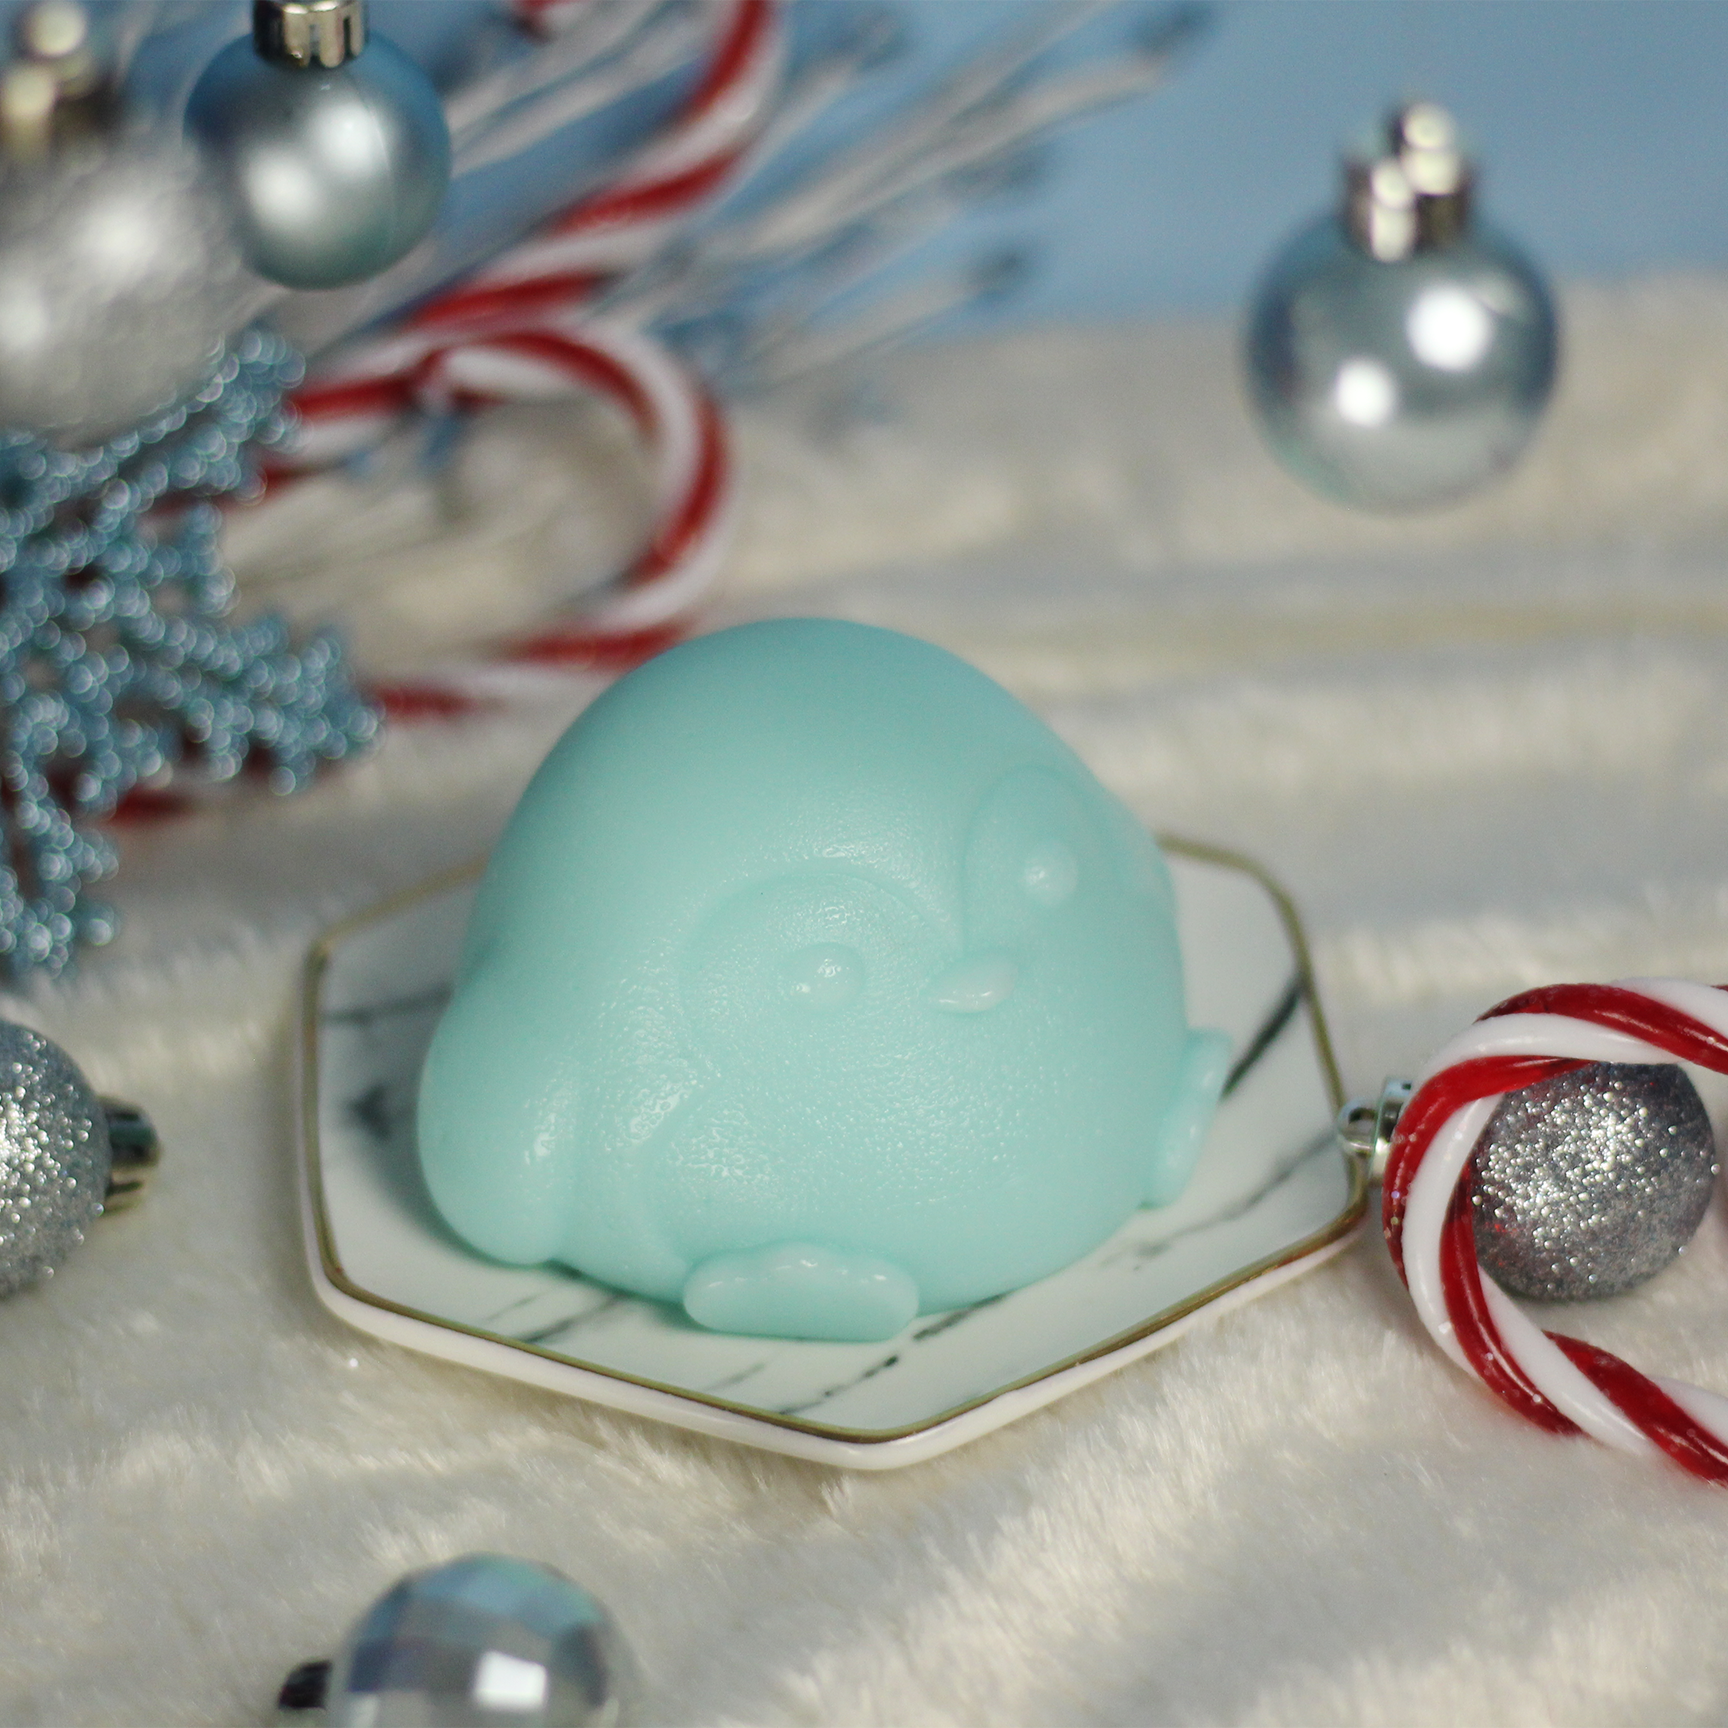 Peppermint Penguin Jelly Soap - Frolic Creations - Soap - Cute Self Care - Kawaii Atheistic - Quirky Gift - Gift For Her